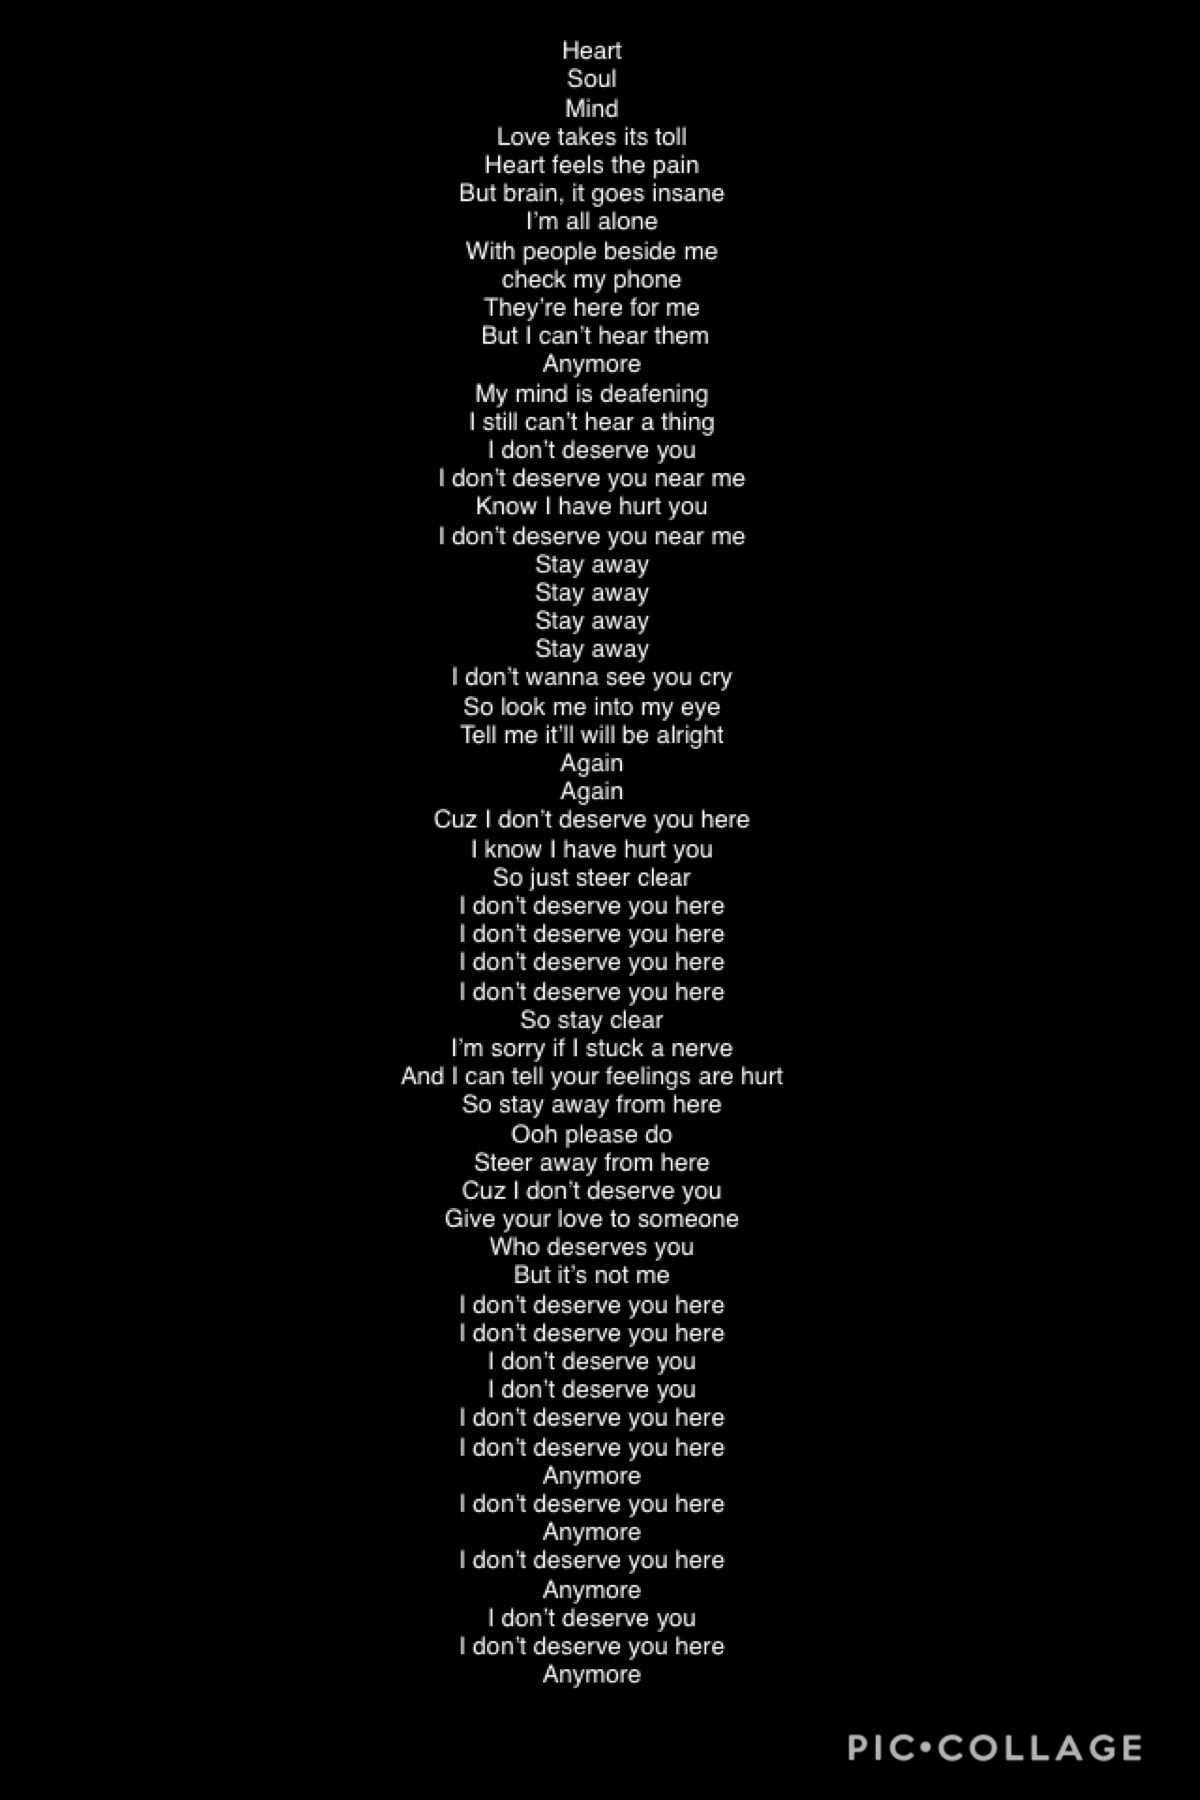 Lyrics to a song I wrote 